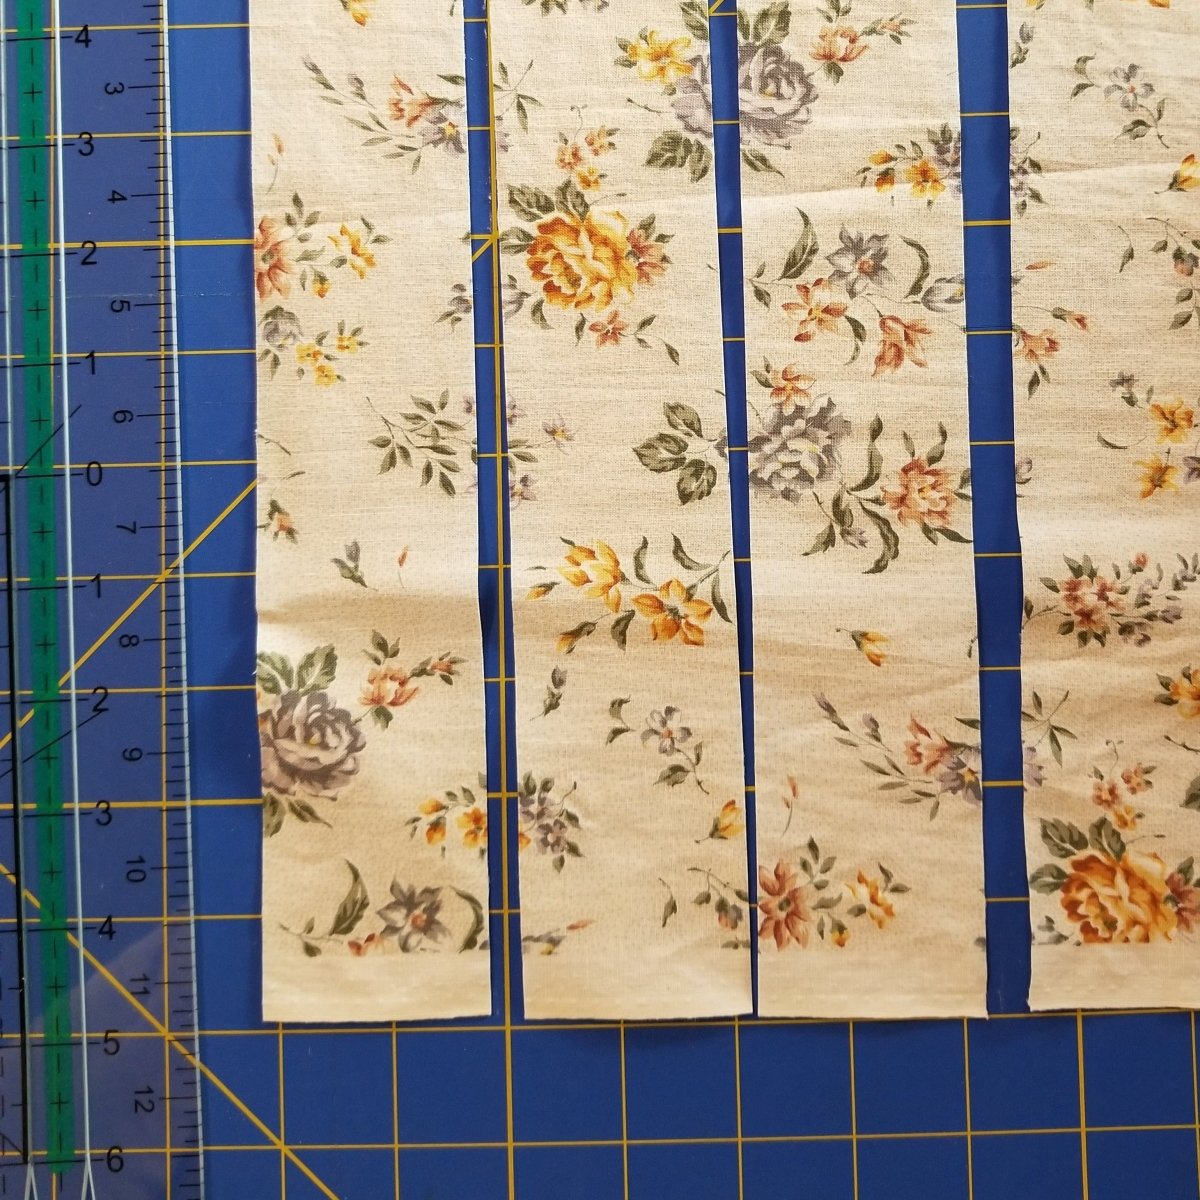 Strips of fabric cut with the Creative Shape Cut Ruler